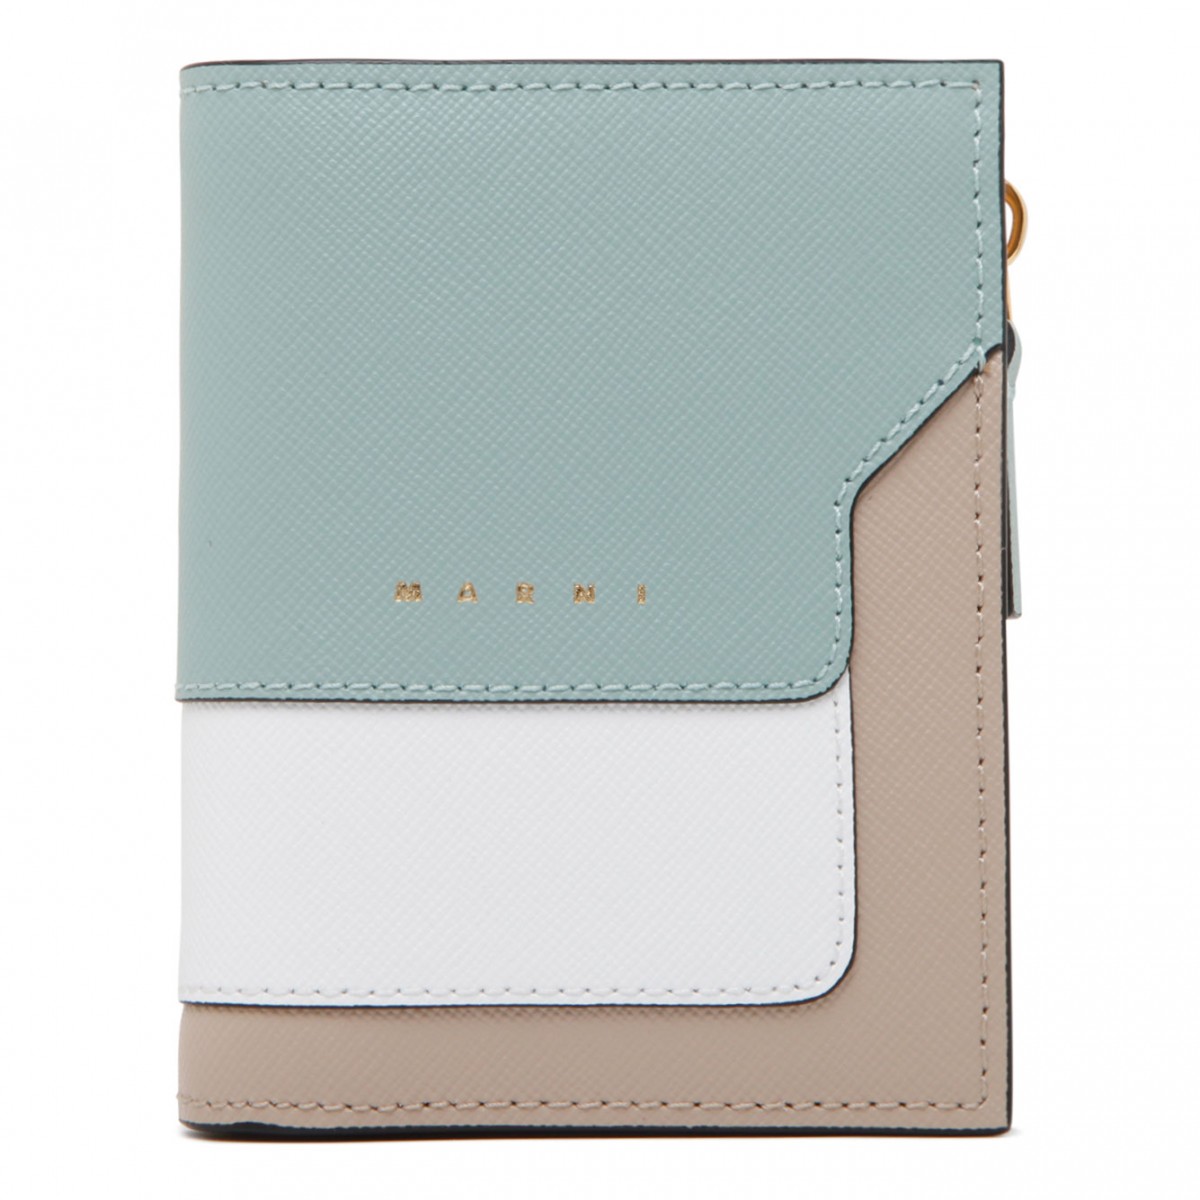 Green, Limestone and Light Camel Wallet